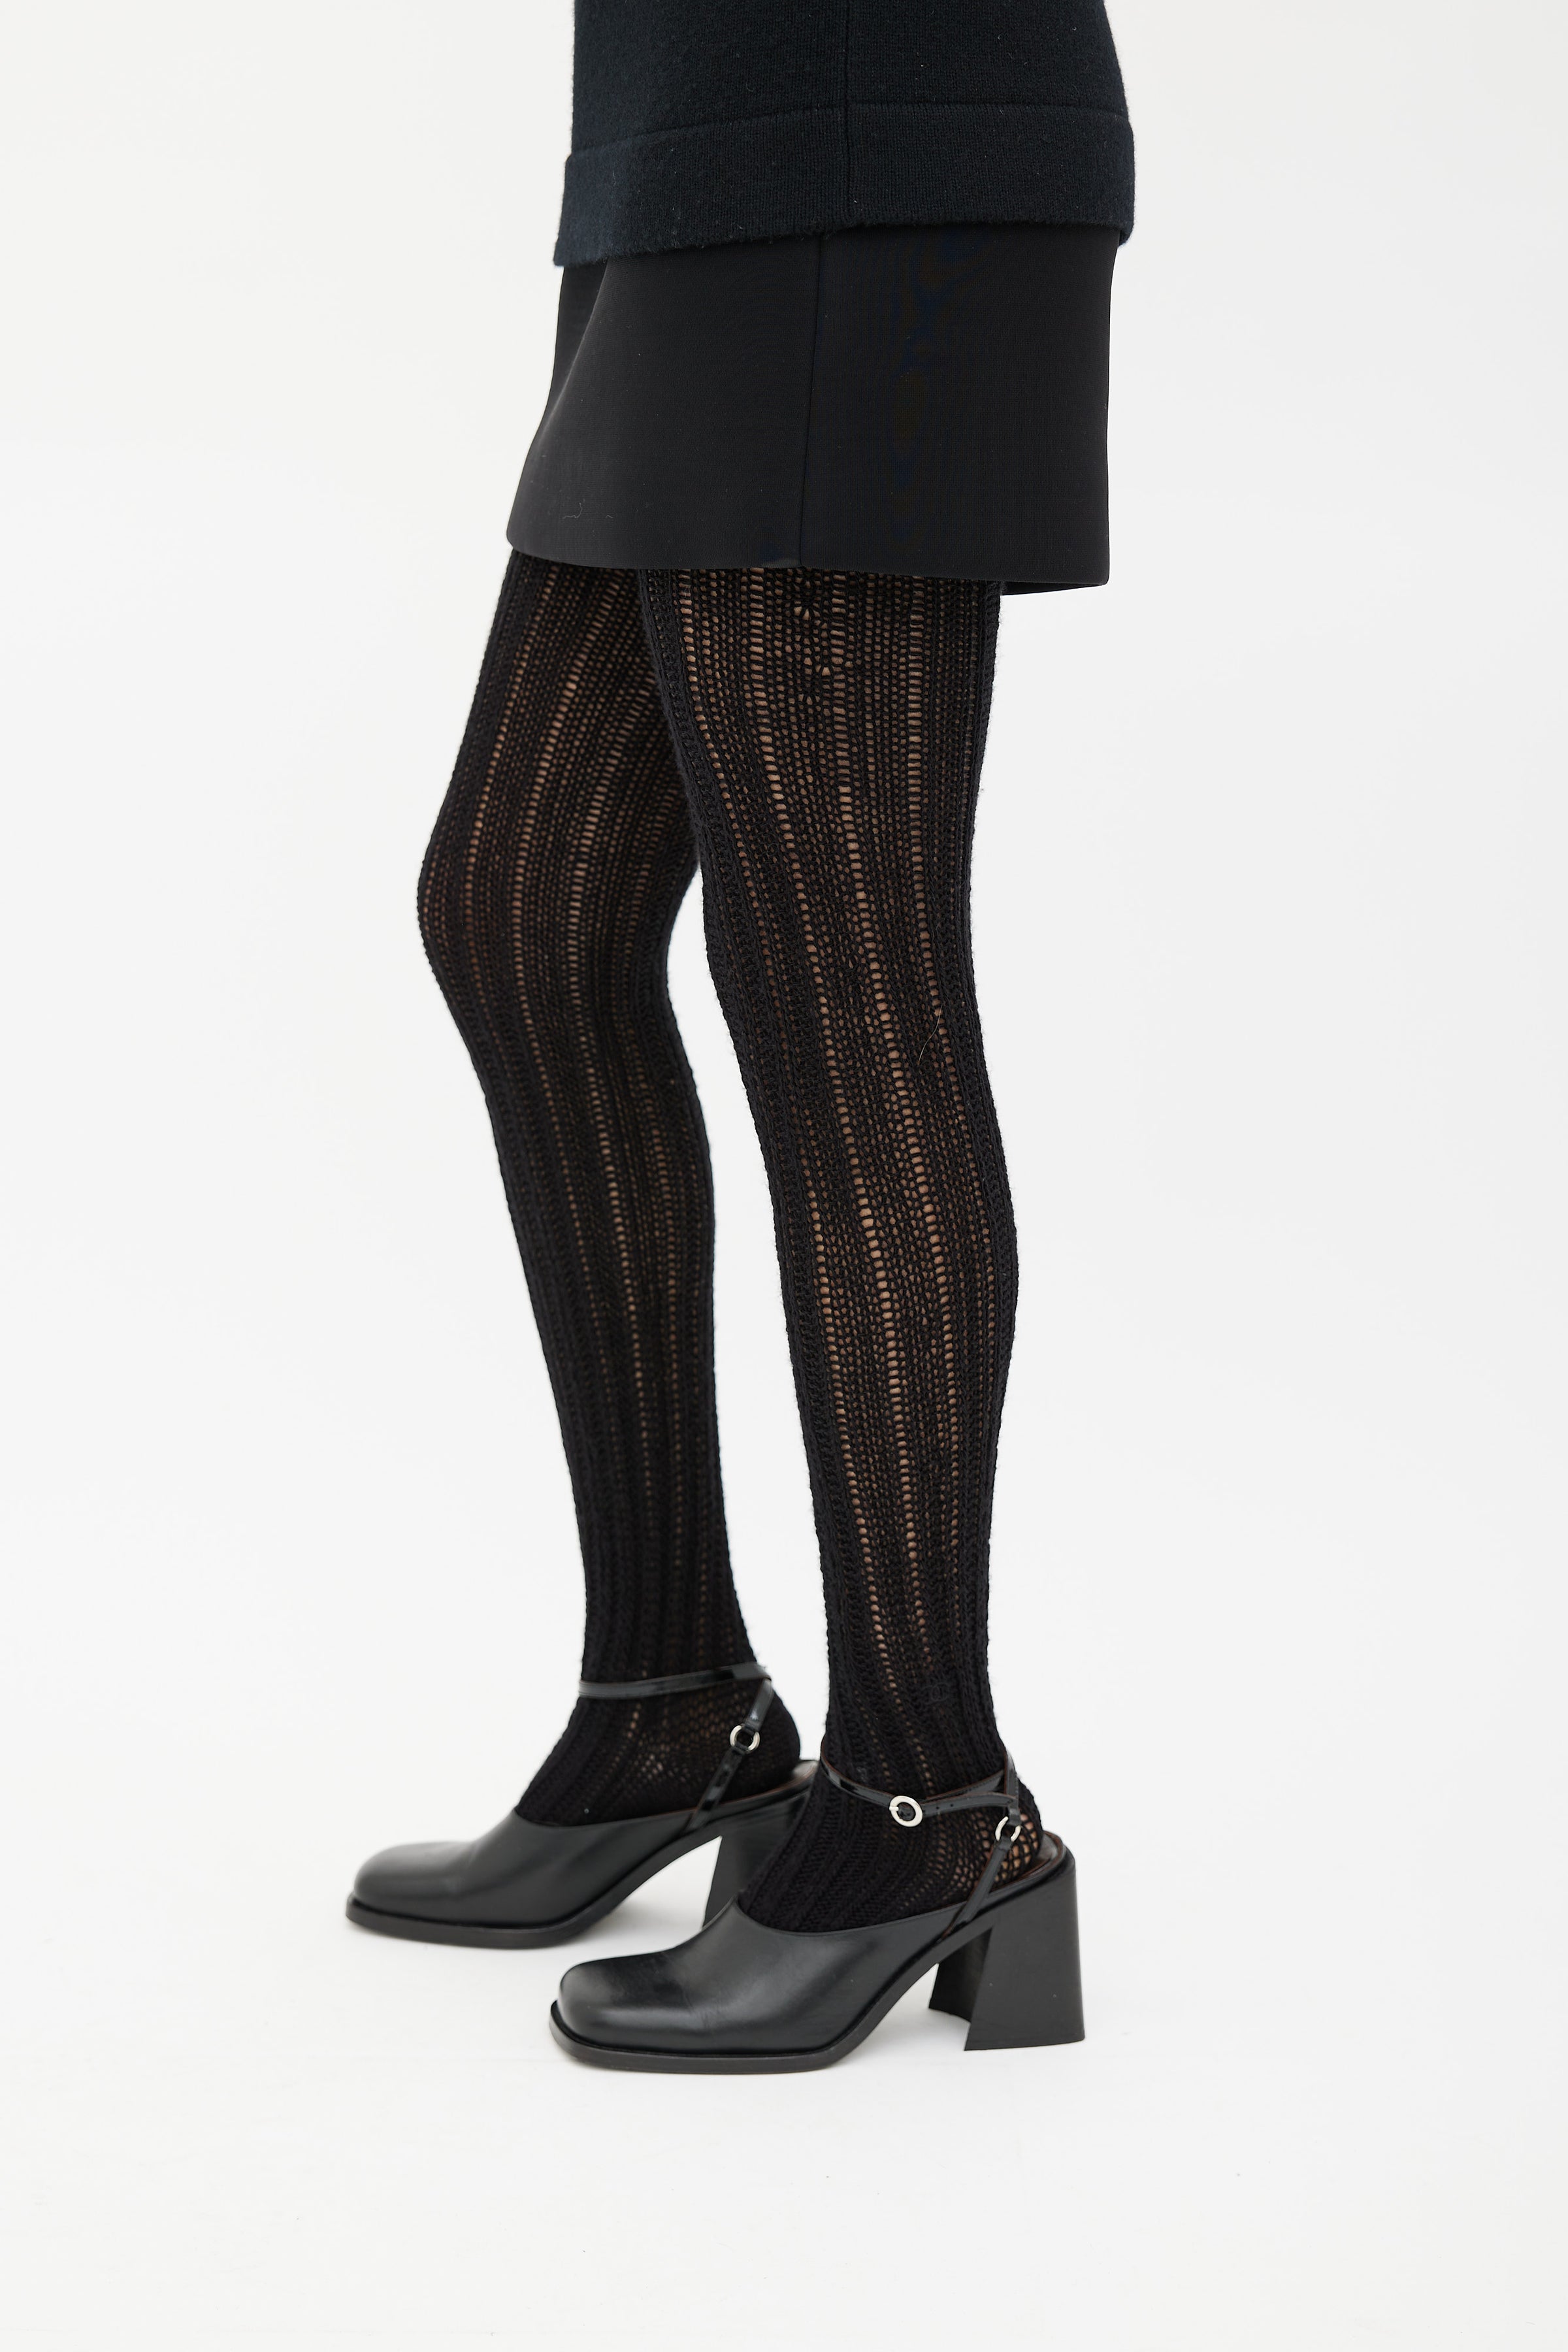 Chanel CC Knit Tights - Pink Hosiery, Accessories - CHA513344